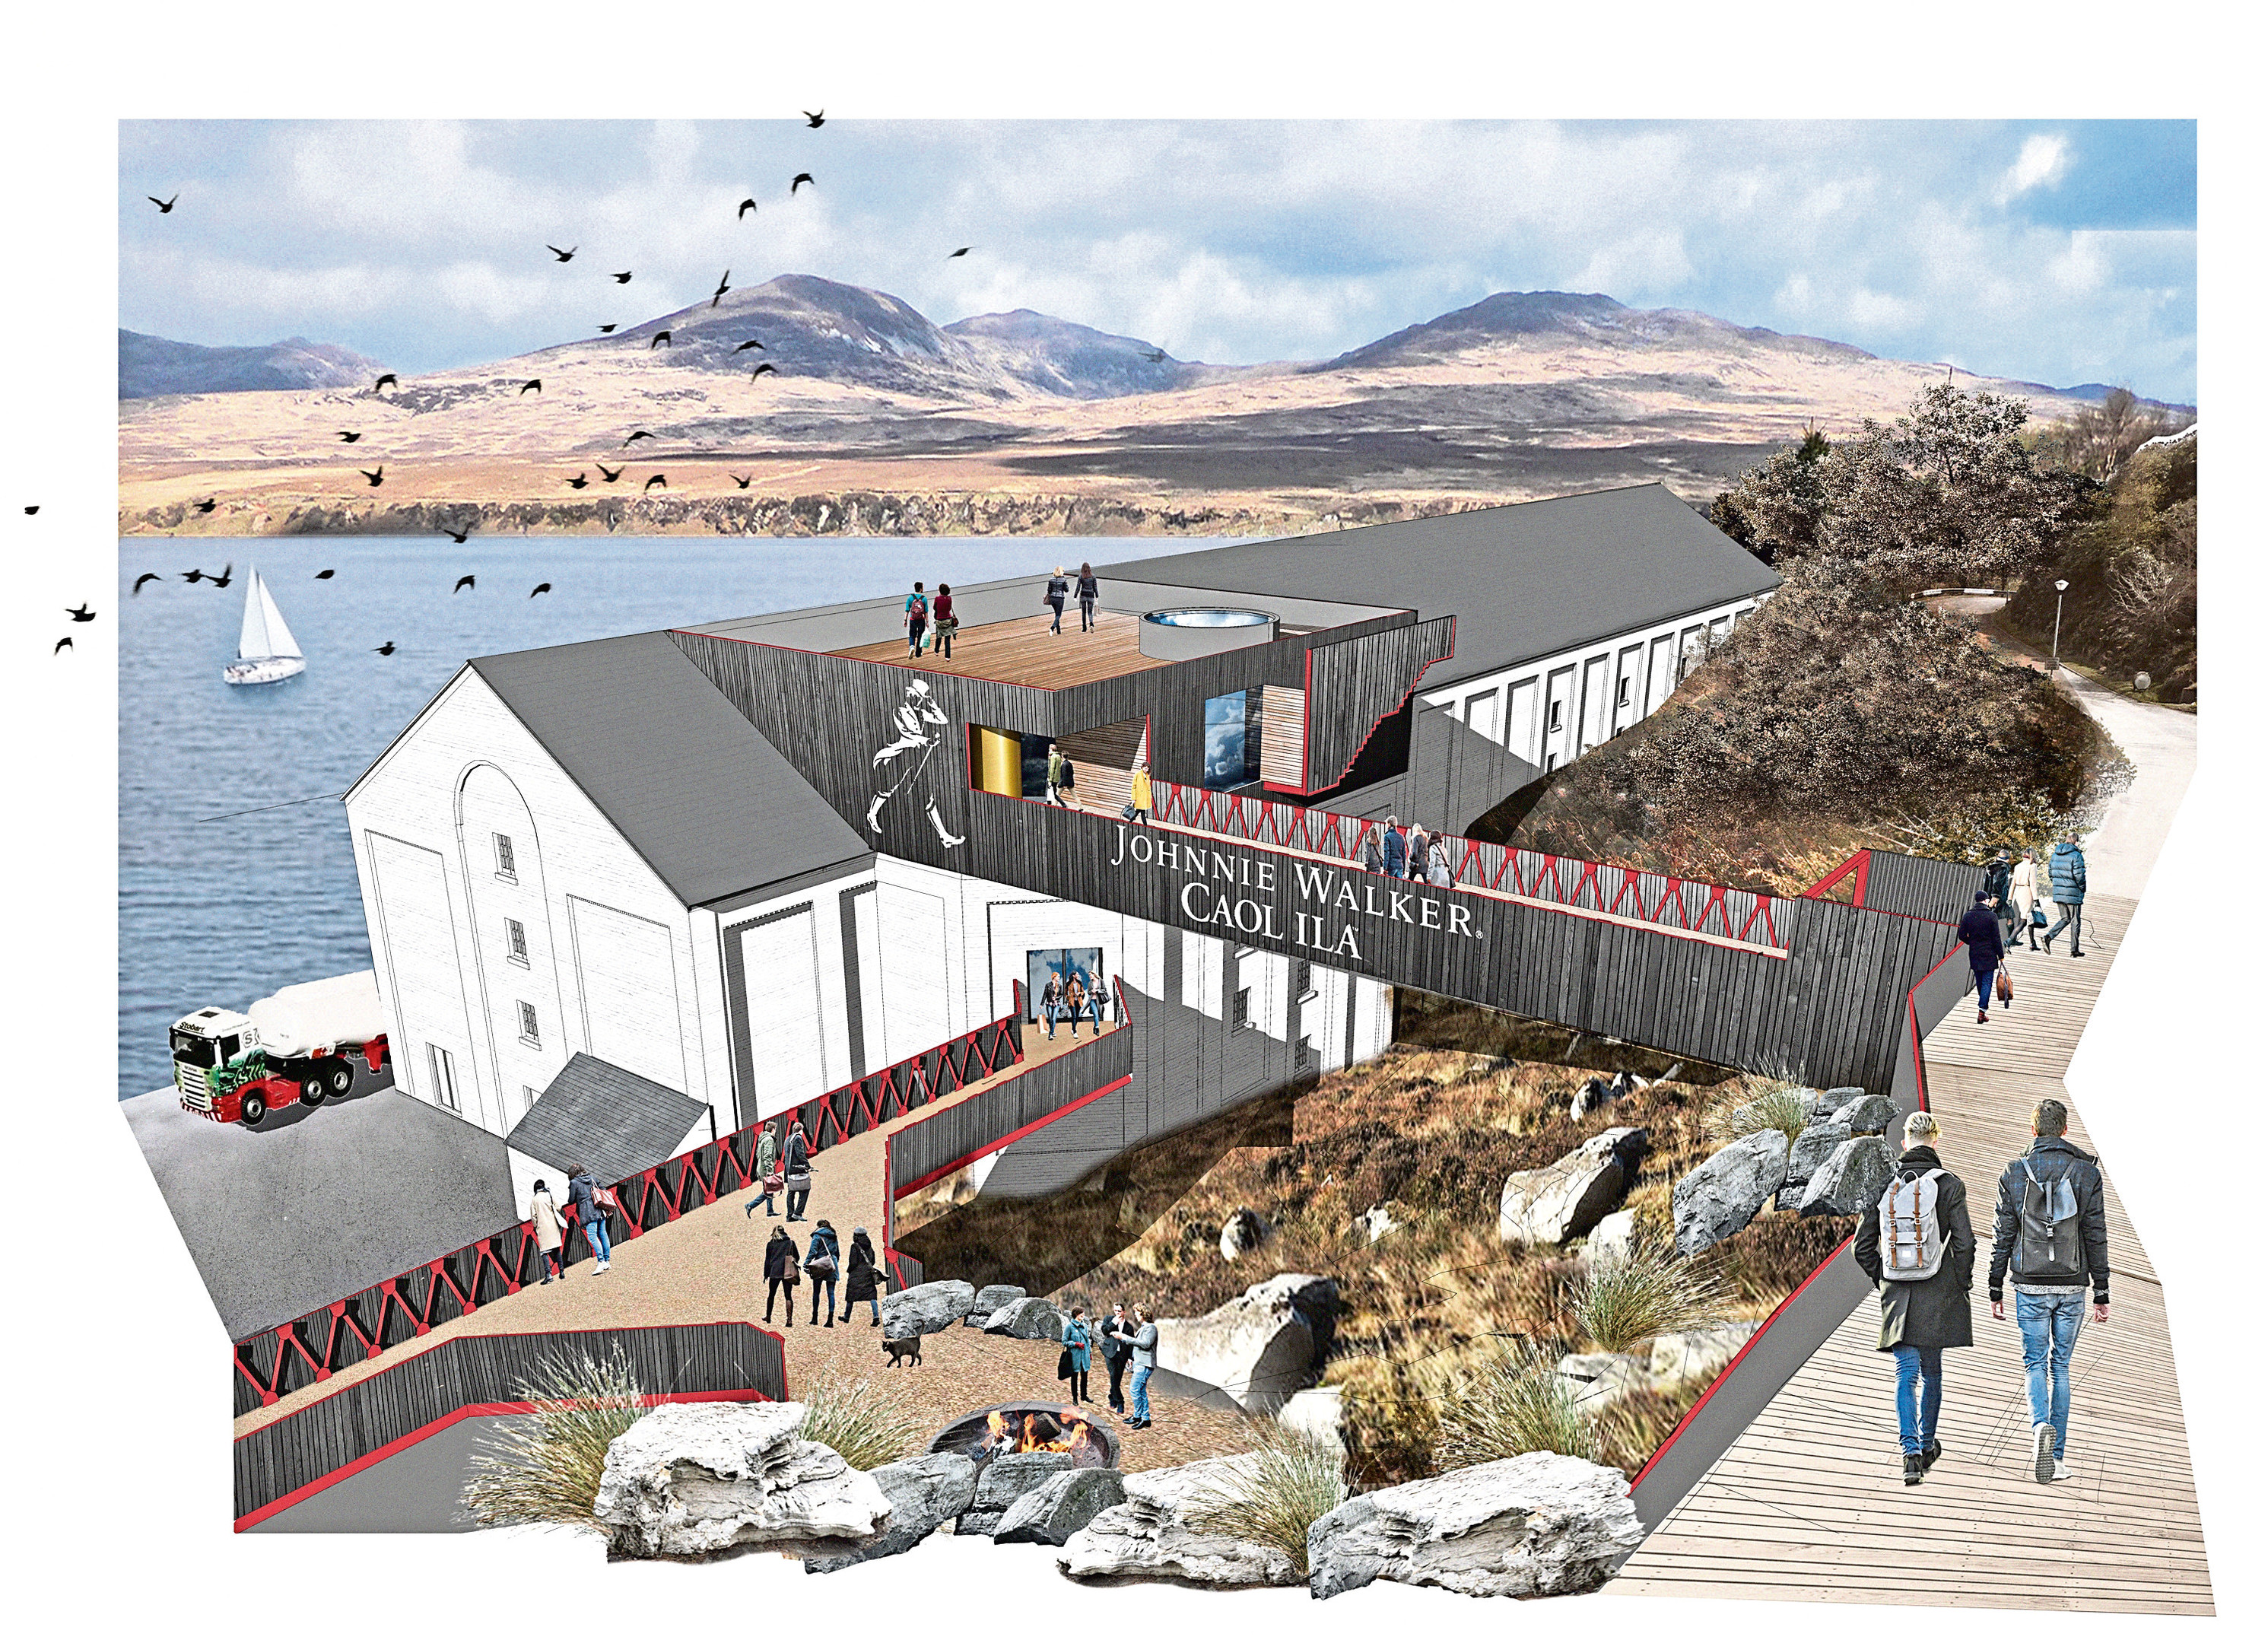 The visitor centre will be built in the warehouse and overlook the Sound of Islay, with a pedestrian bridge on to the roof.